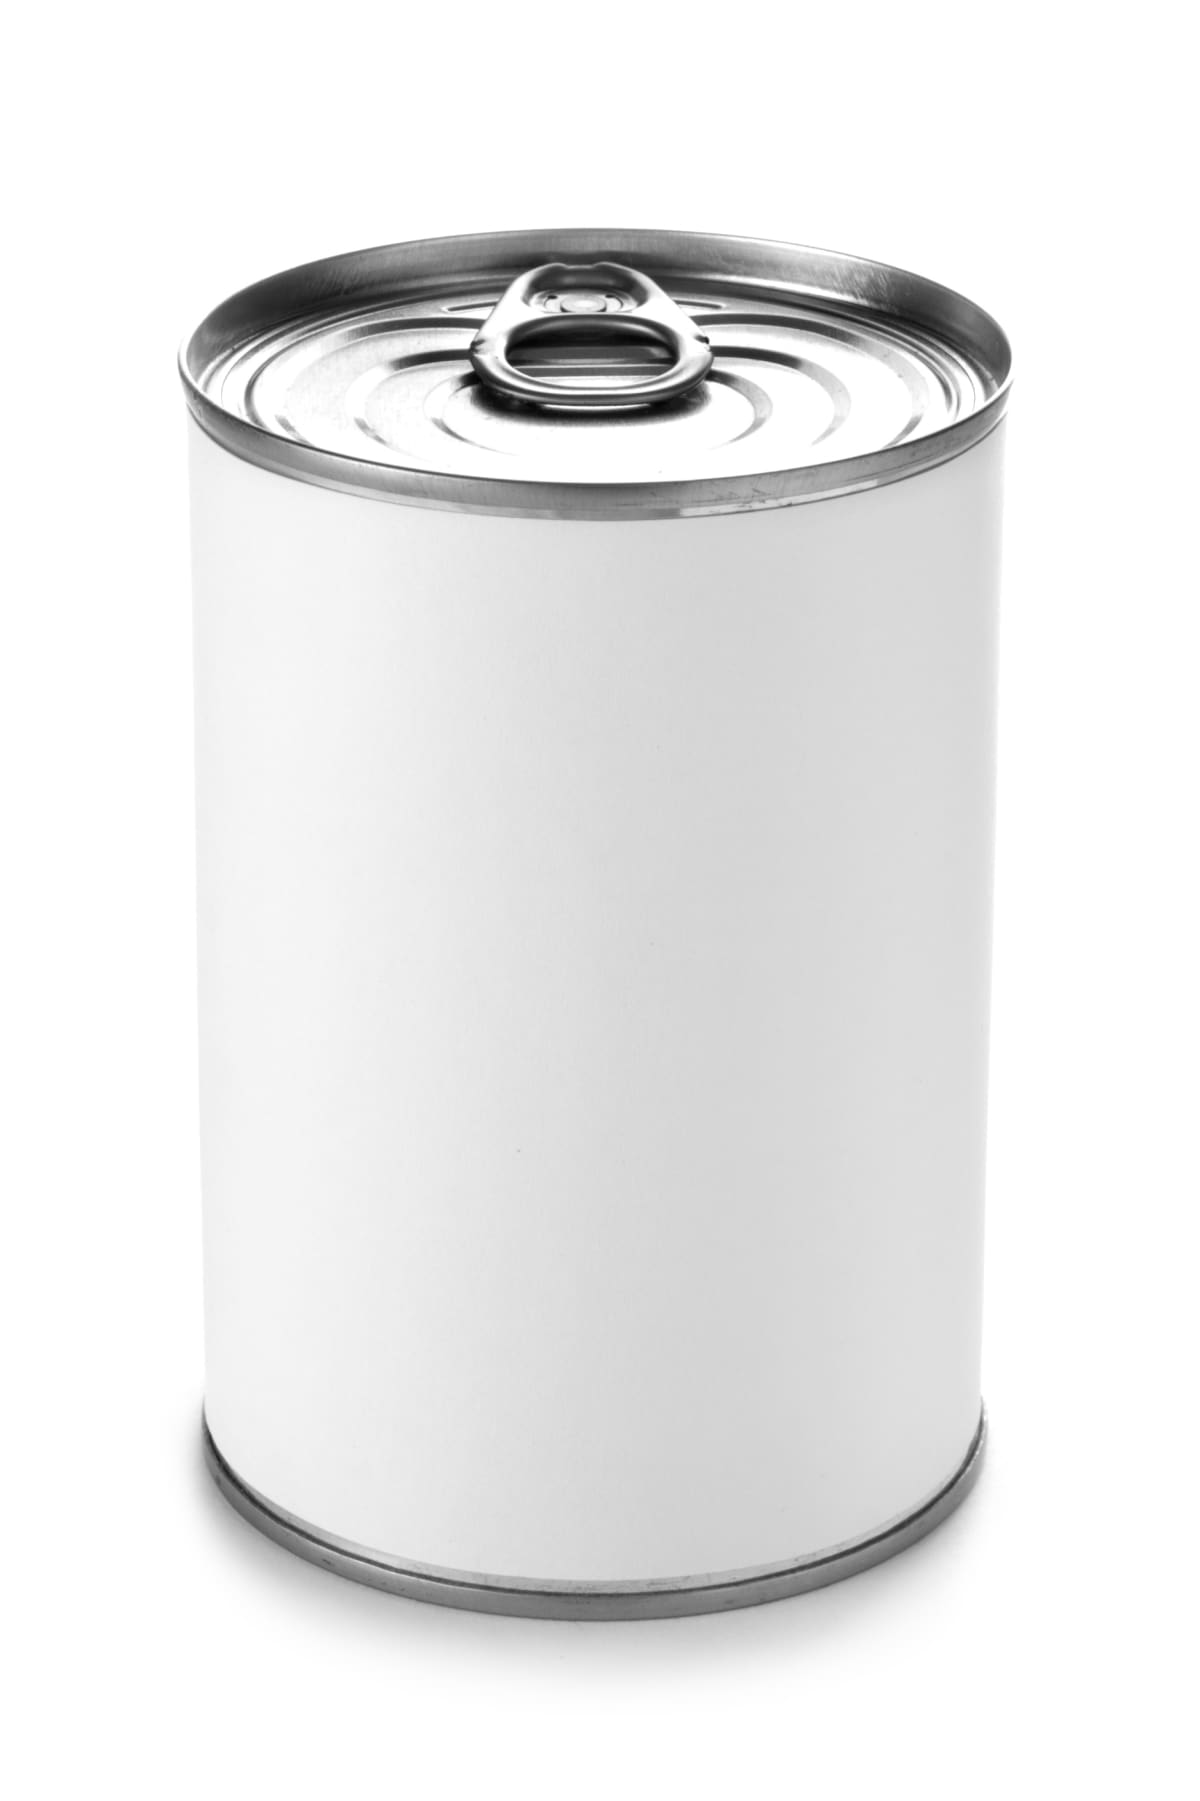 Tin can with a blank label isolated on a white background. Ideal for positioning your own artwork onto.